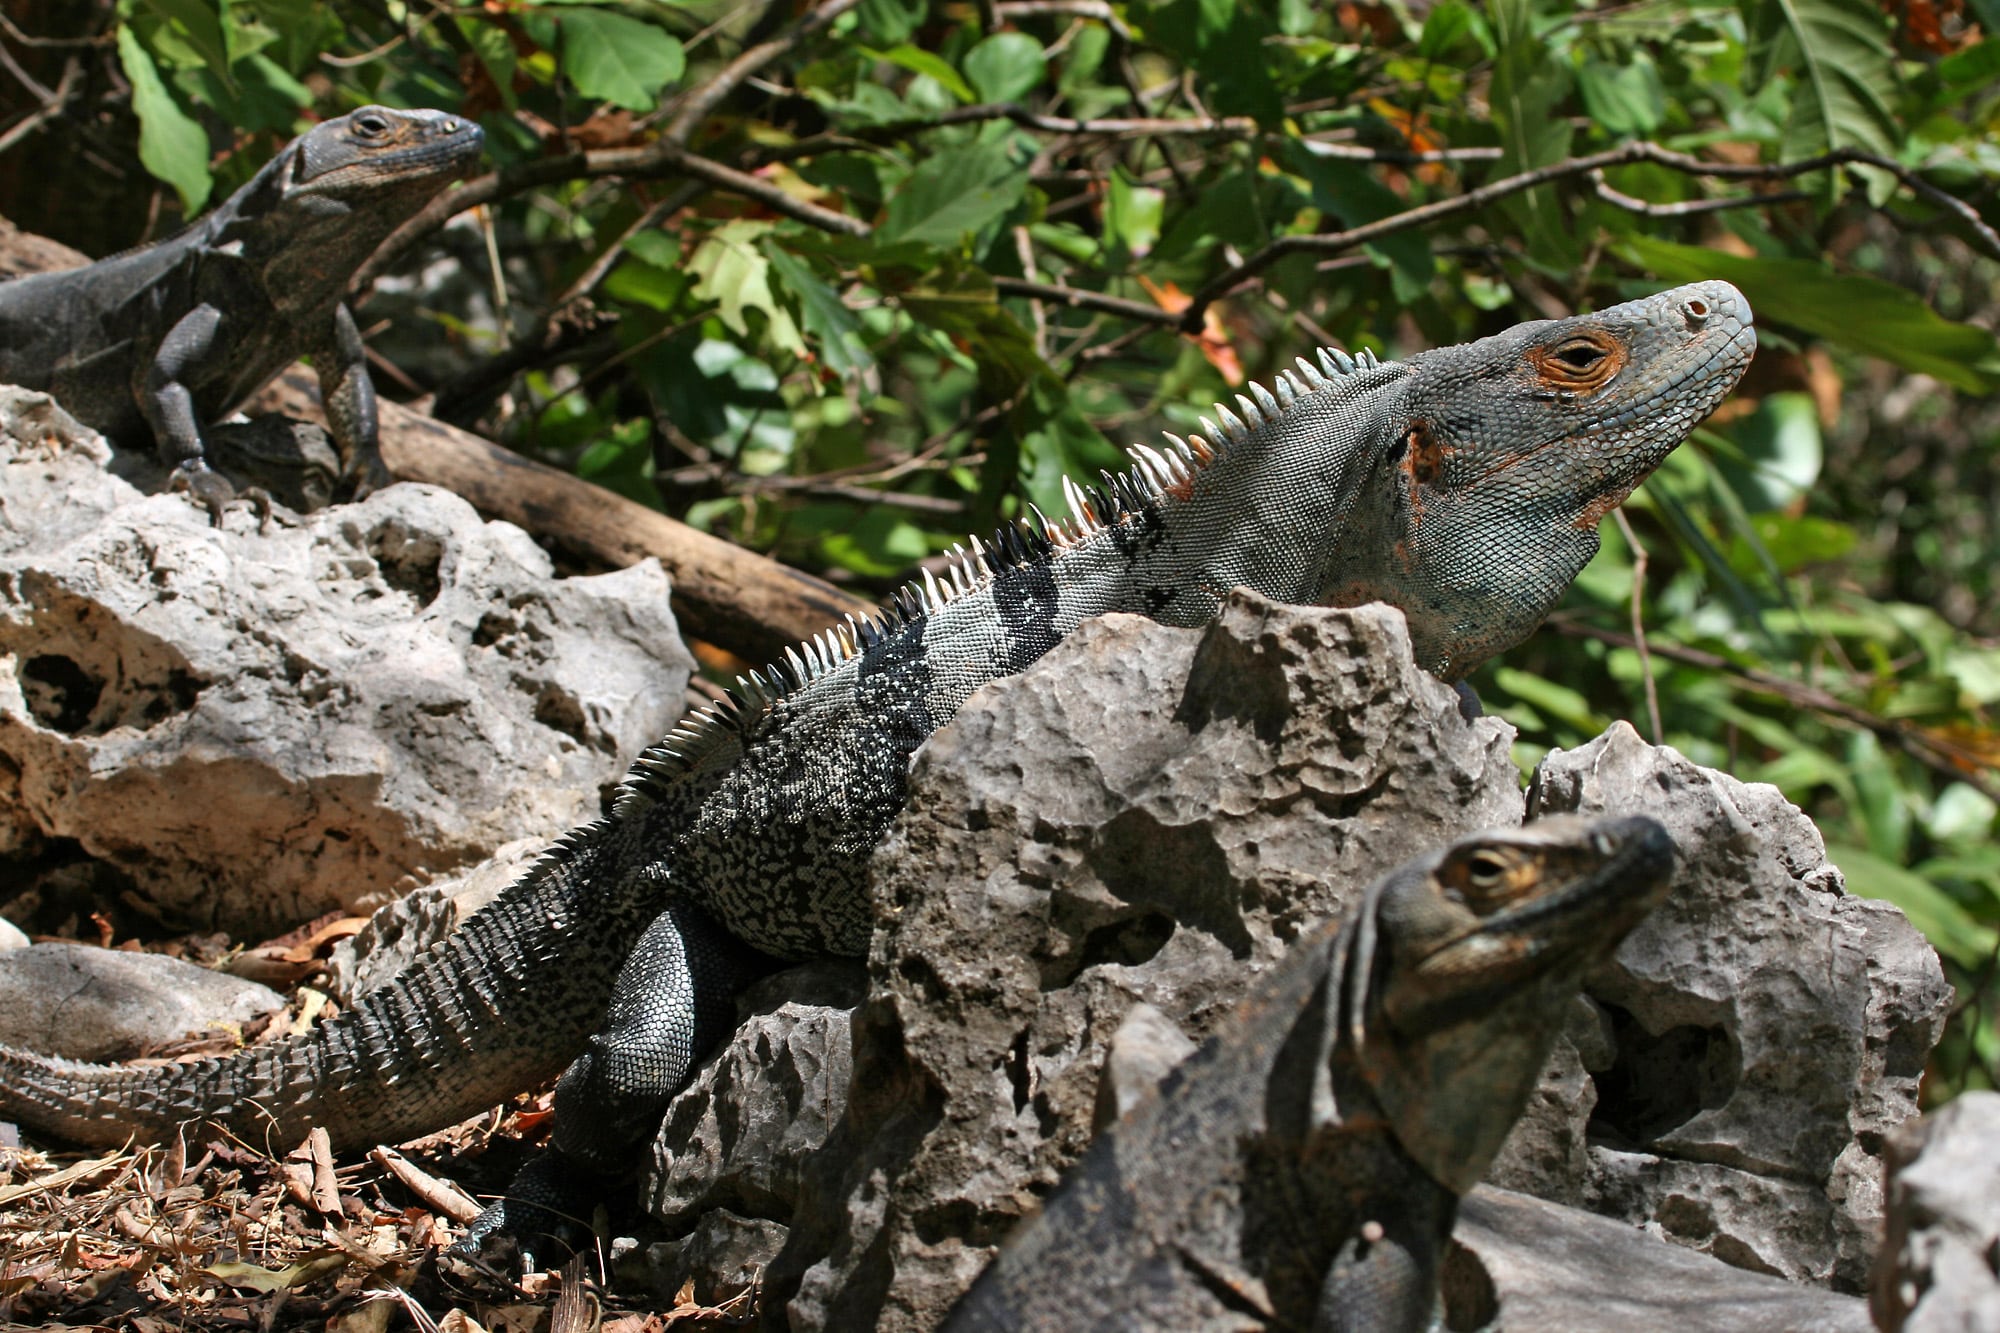 About the Black Iguana, the Fastest Reptile in the World